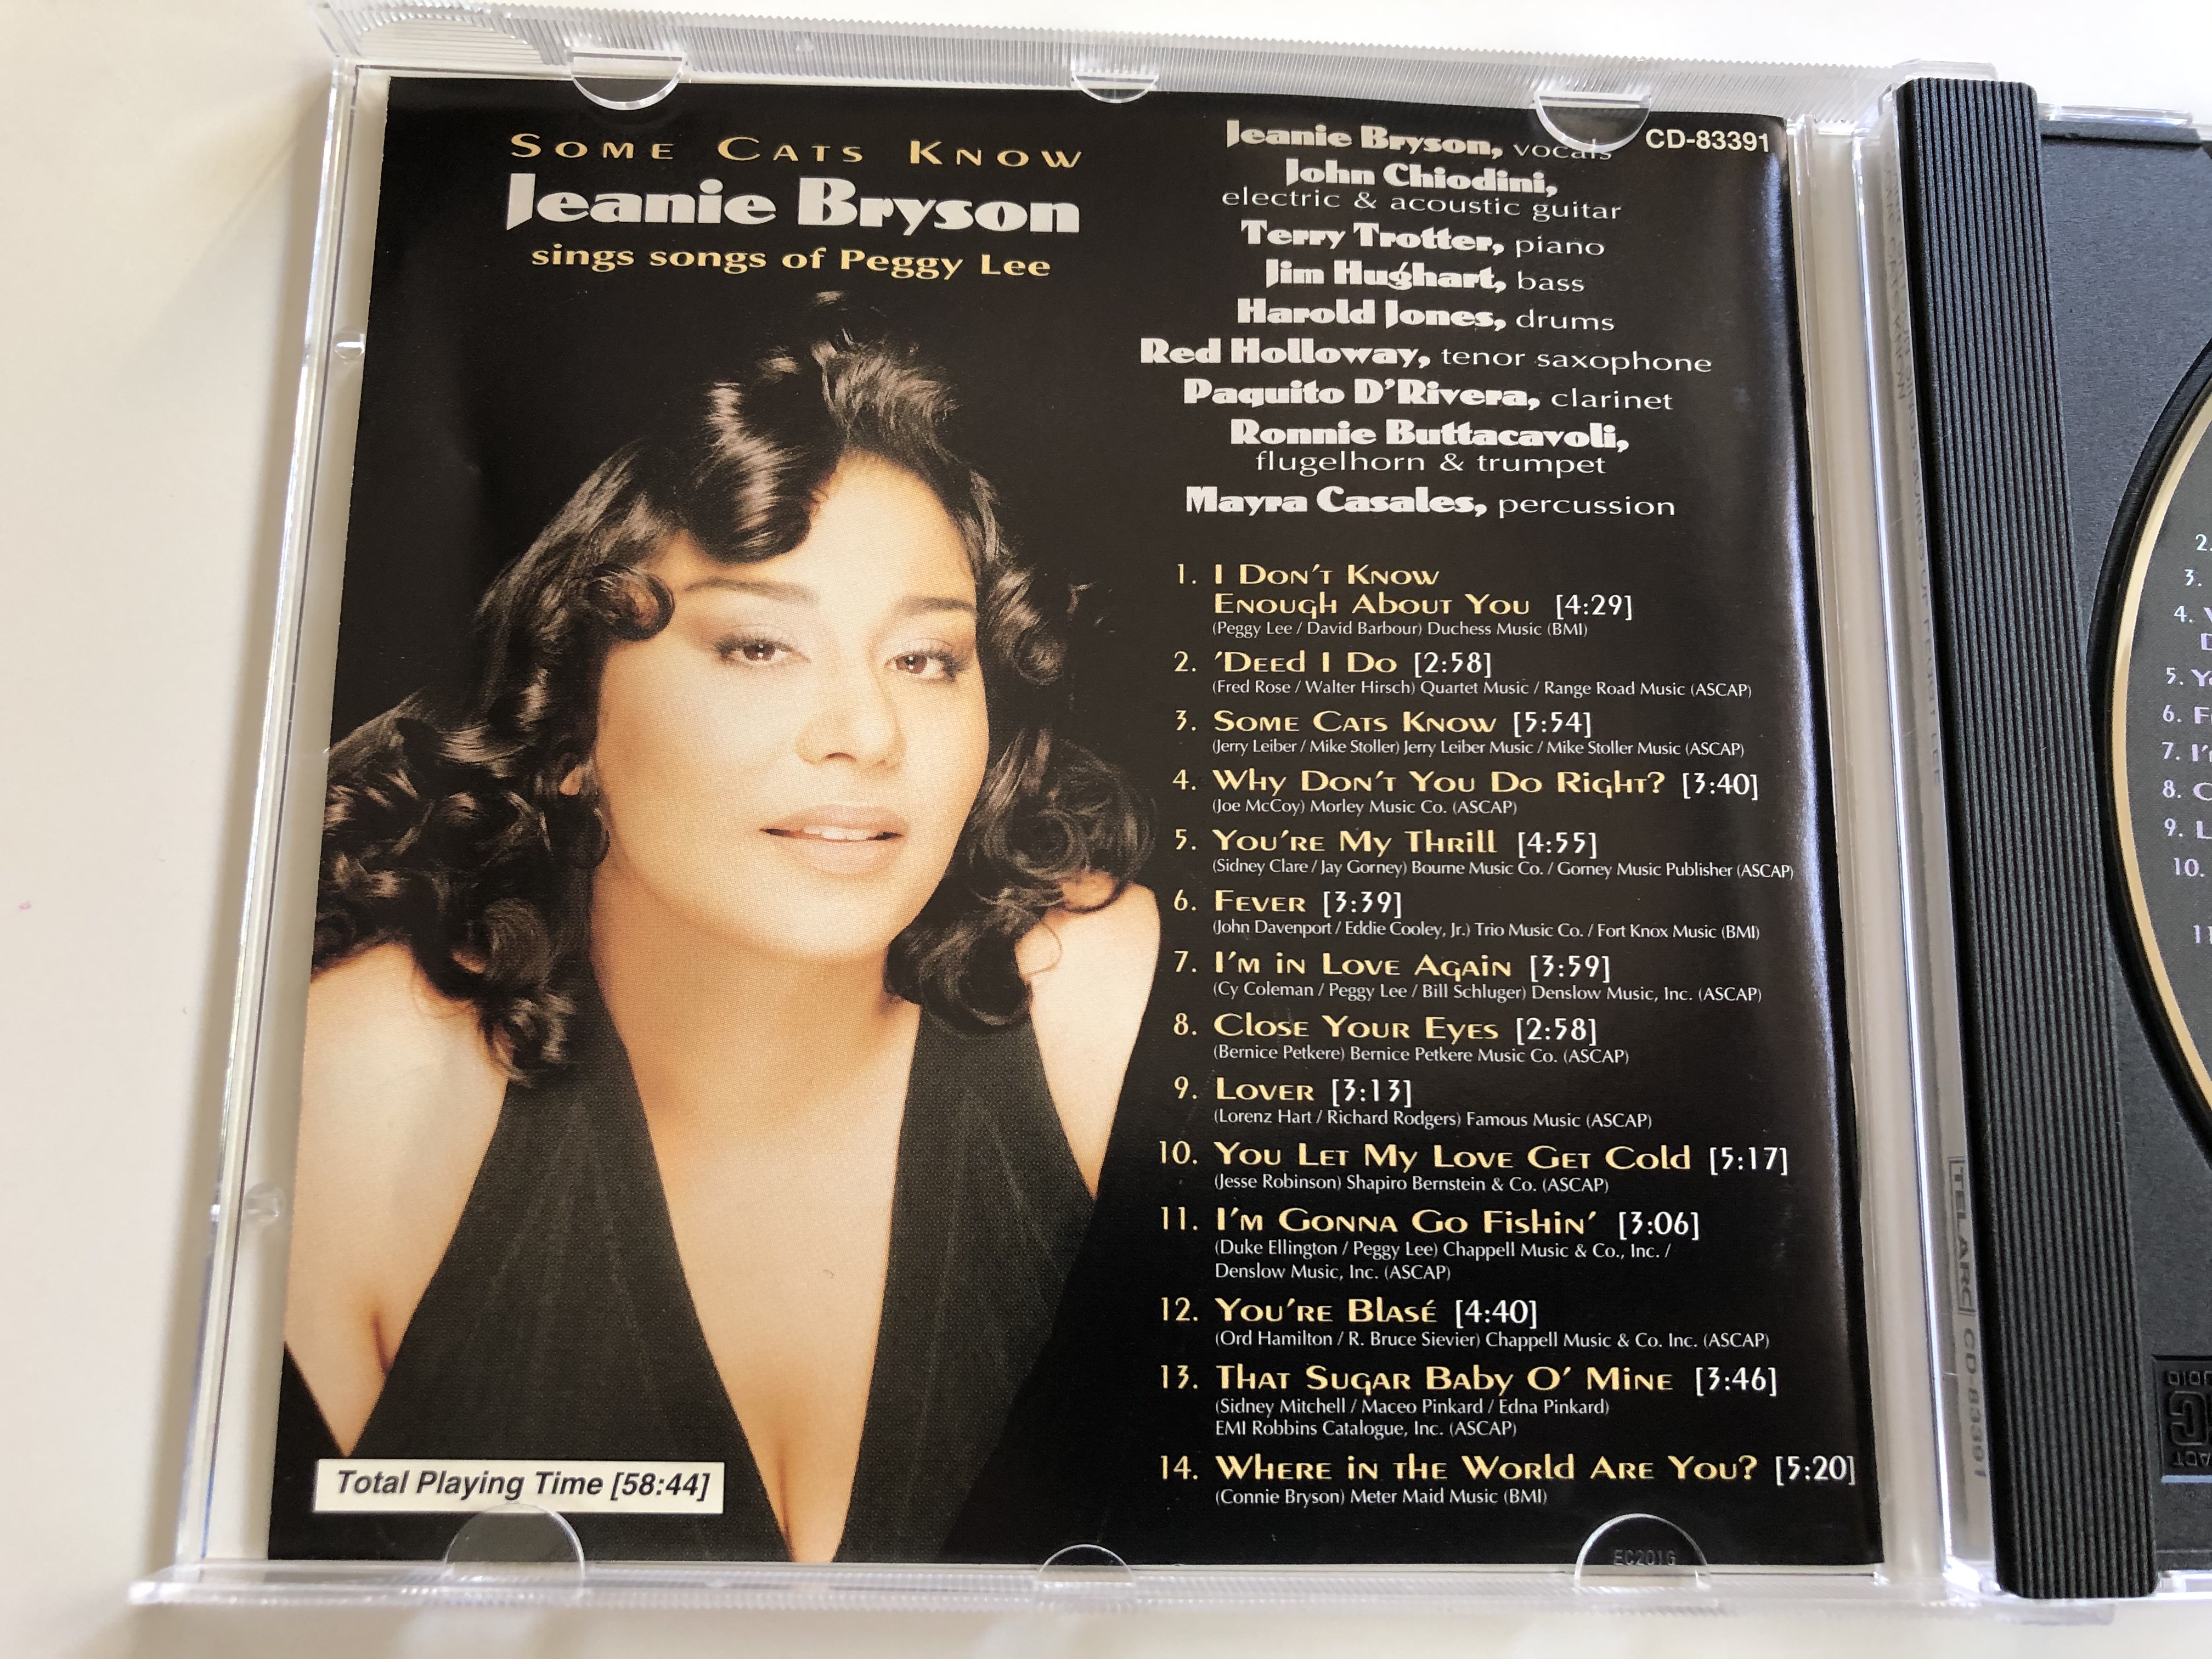 some-cats-know-jeanie-bryson-sings-songs-of-peggy-lee-telarc-jazz-audio-cd-1996-cd-83391-5-.jpg